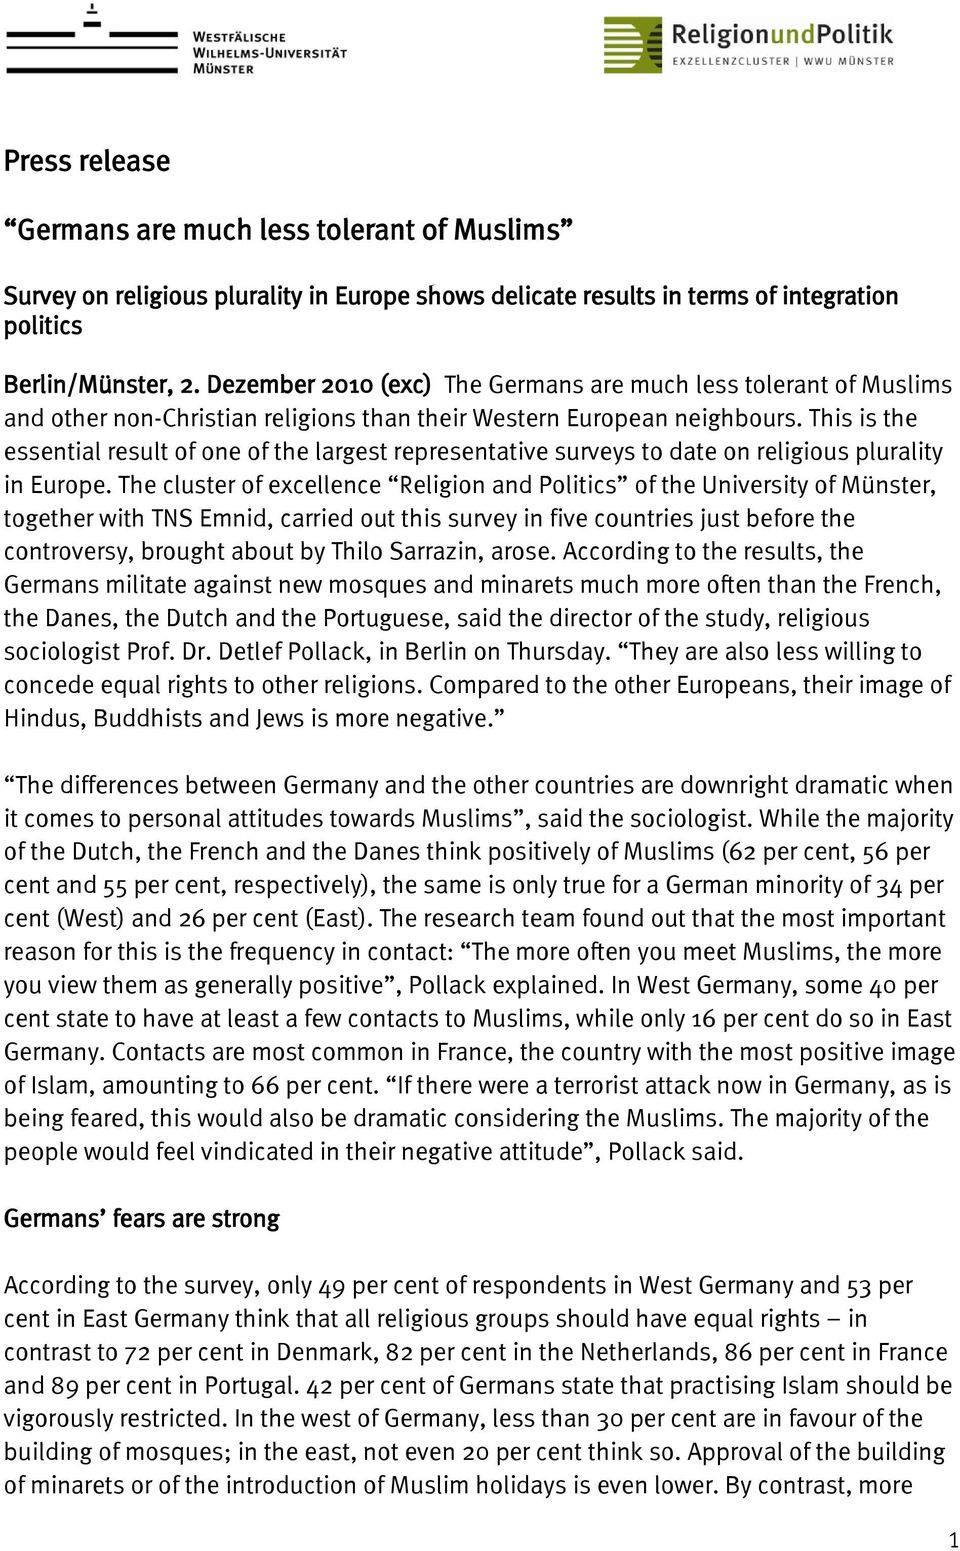 This is the essential result of one of the largest representative surveys to date on religious plurality in Europe.